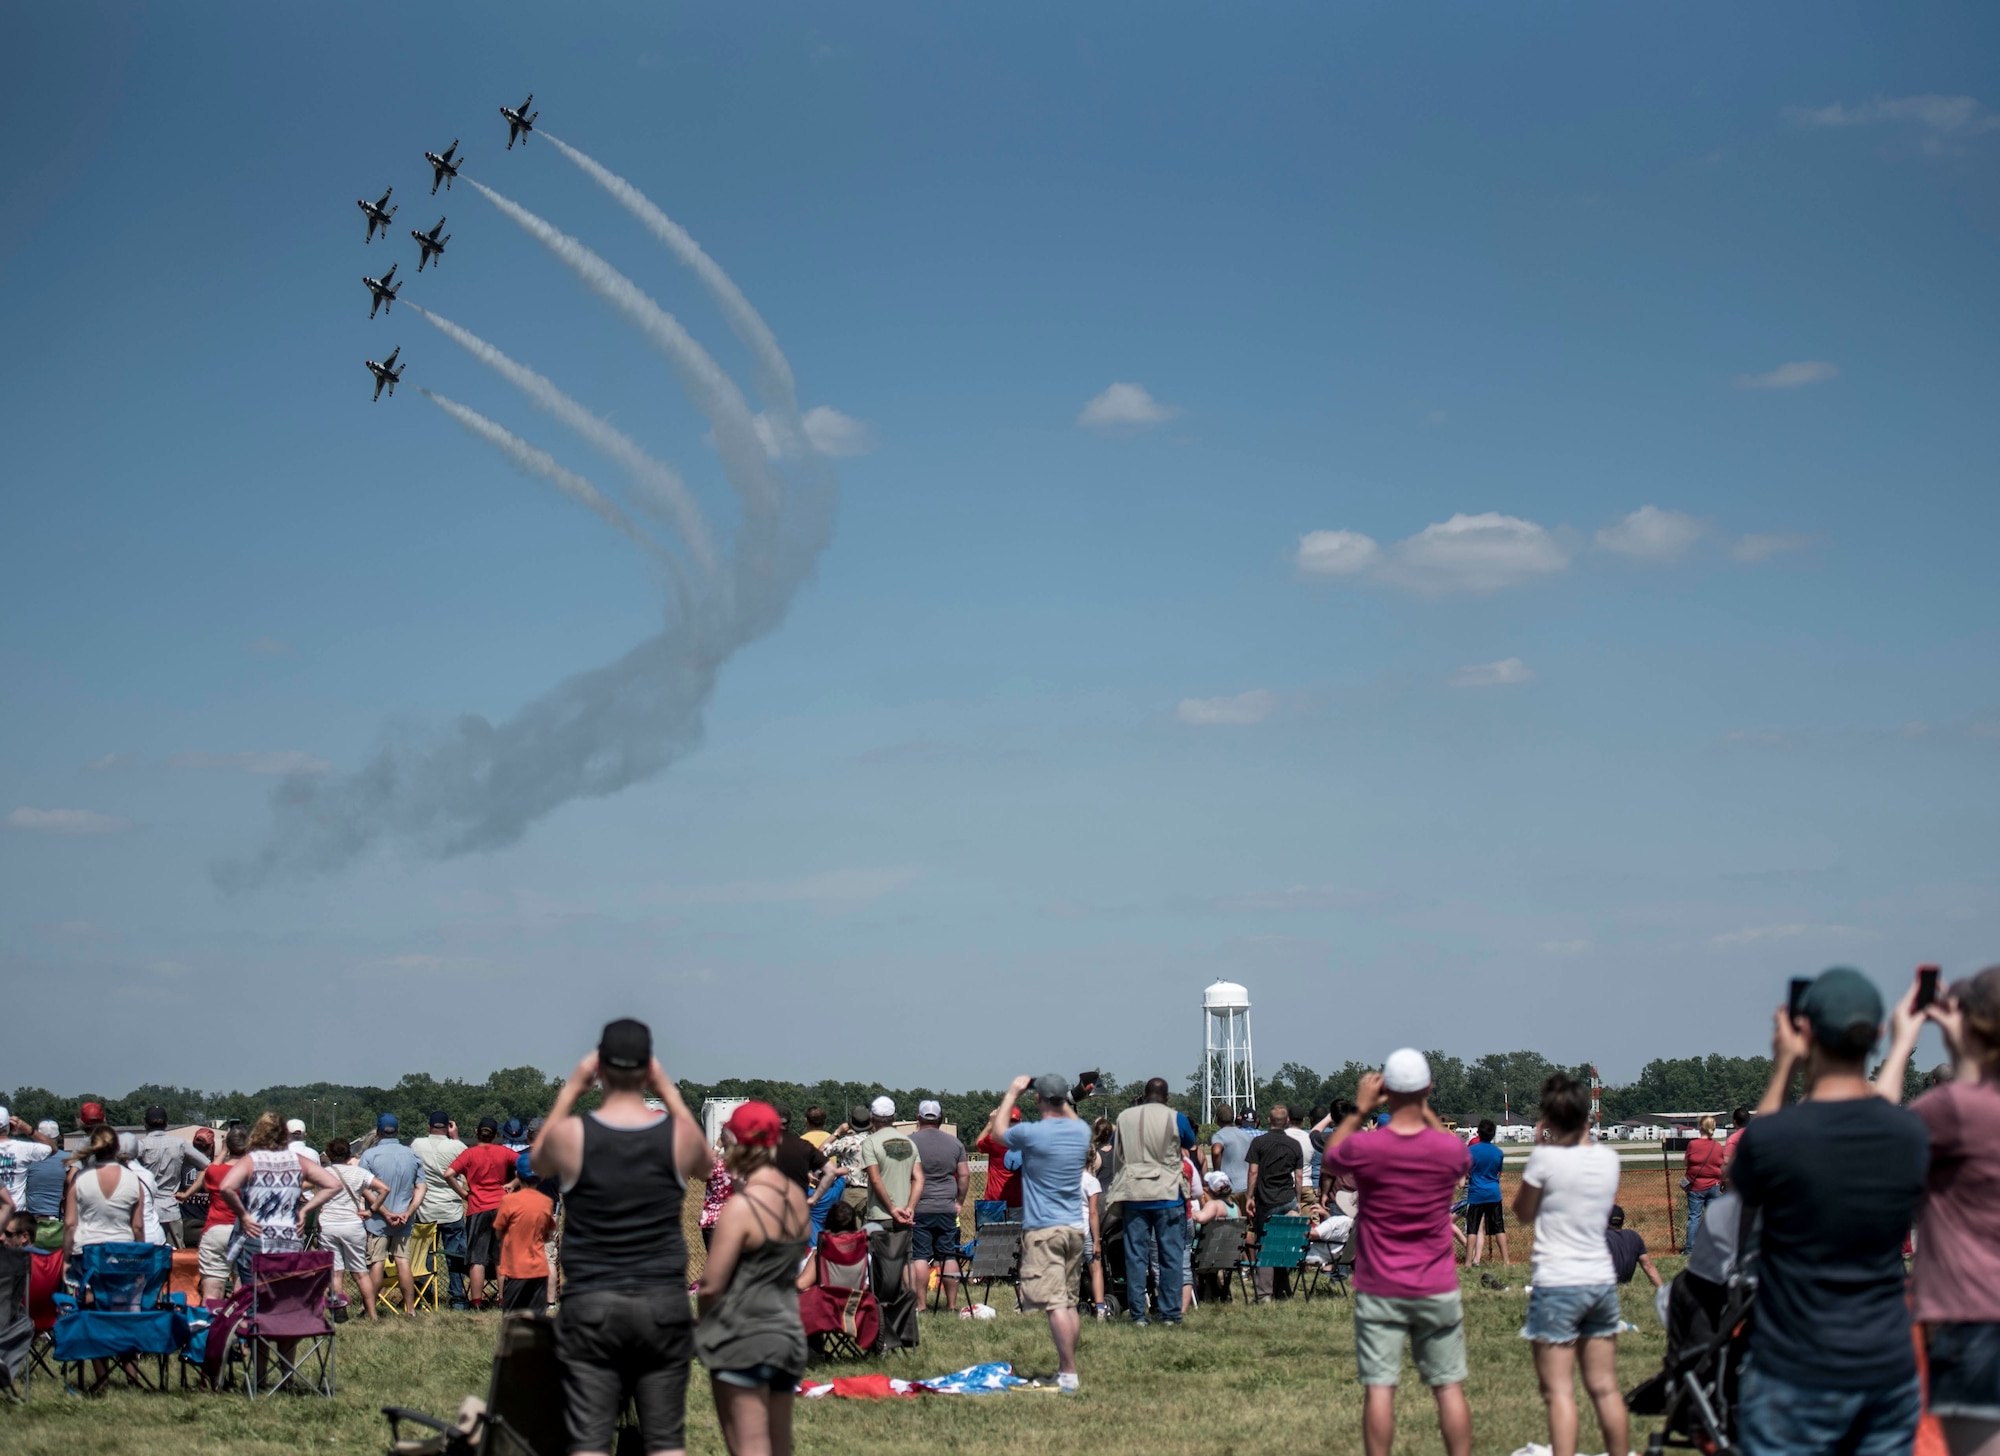 The Thunderbirds, officially known as the U.S. Air Force Air Demonstration Squadron, performs precision aerial maneuvers to demonstrate the capabilities the F-16 Fighter Falcon, the Air Force’s premier multi-role fighter jet, Scott Air Force Base, Ill., June 11, 2017.   Eight highly experienced fighter pilots, four support officers, three civilians, and over 120 enlisted personnel help make it possible for the team to showcase the capabilities of this fighter jet to millions of people each year.  Together, this team has ensured that a demonstration has never been cancelled due to maintenance difficulty. (U.S. Air Force photo by Staff Sgt. Jodi Marttinez)